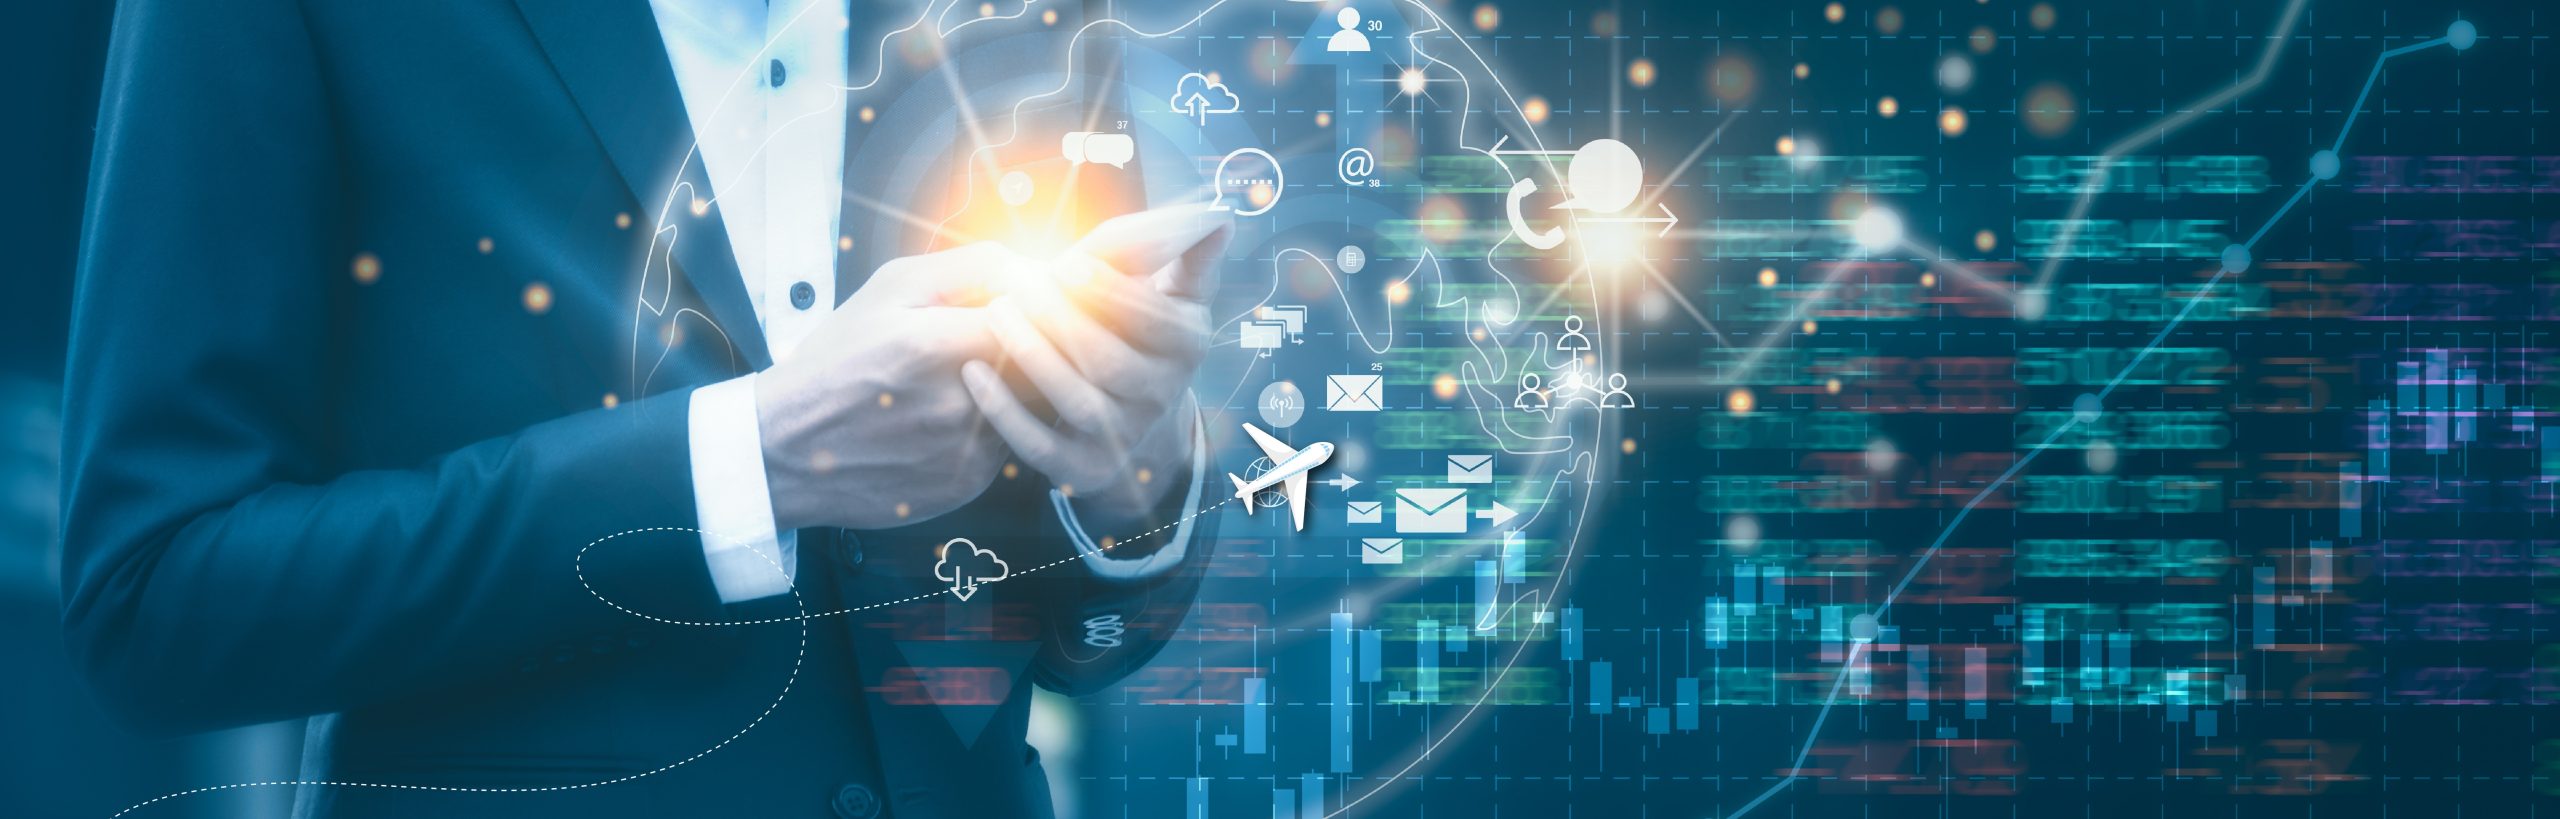 Big Data in Travel Industry: How Technology is Driving Better Customer Experience 